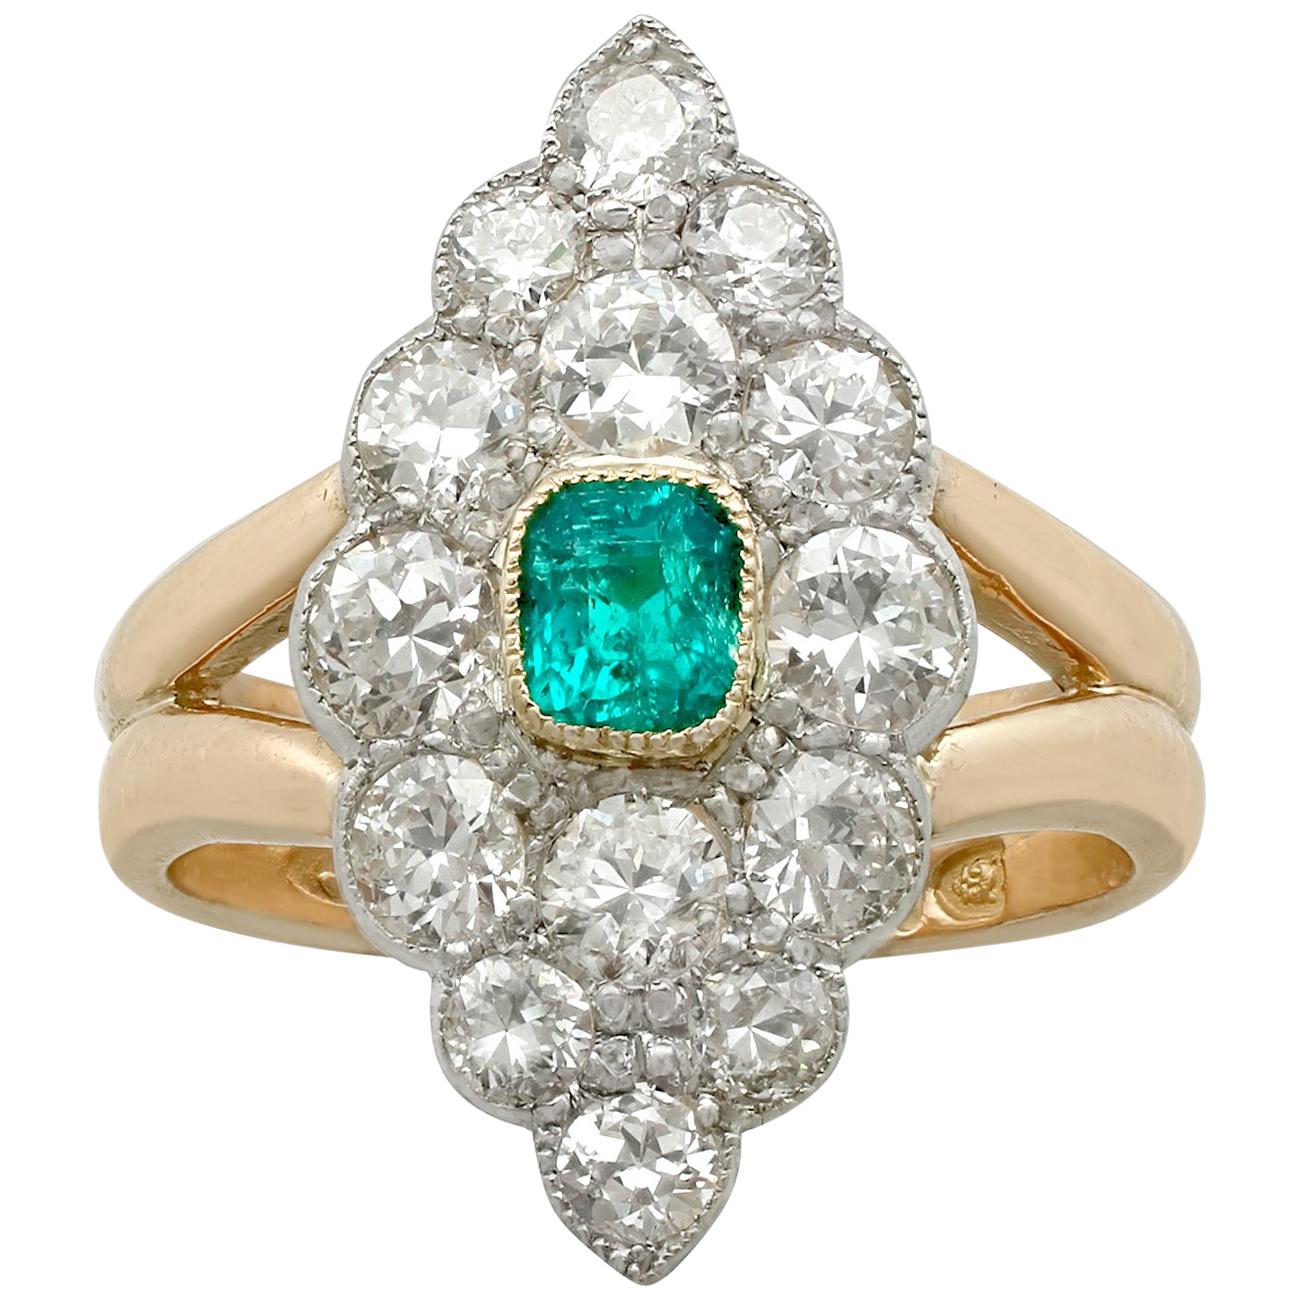 1900 Emerald and 2.66 Carat Diamond Yellow Gold Cocktail Ring